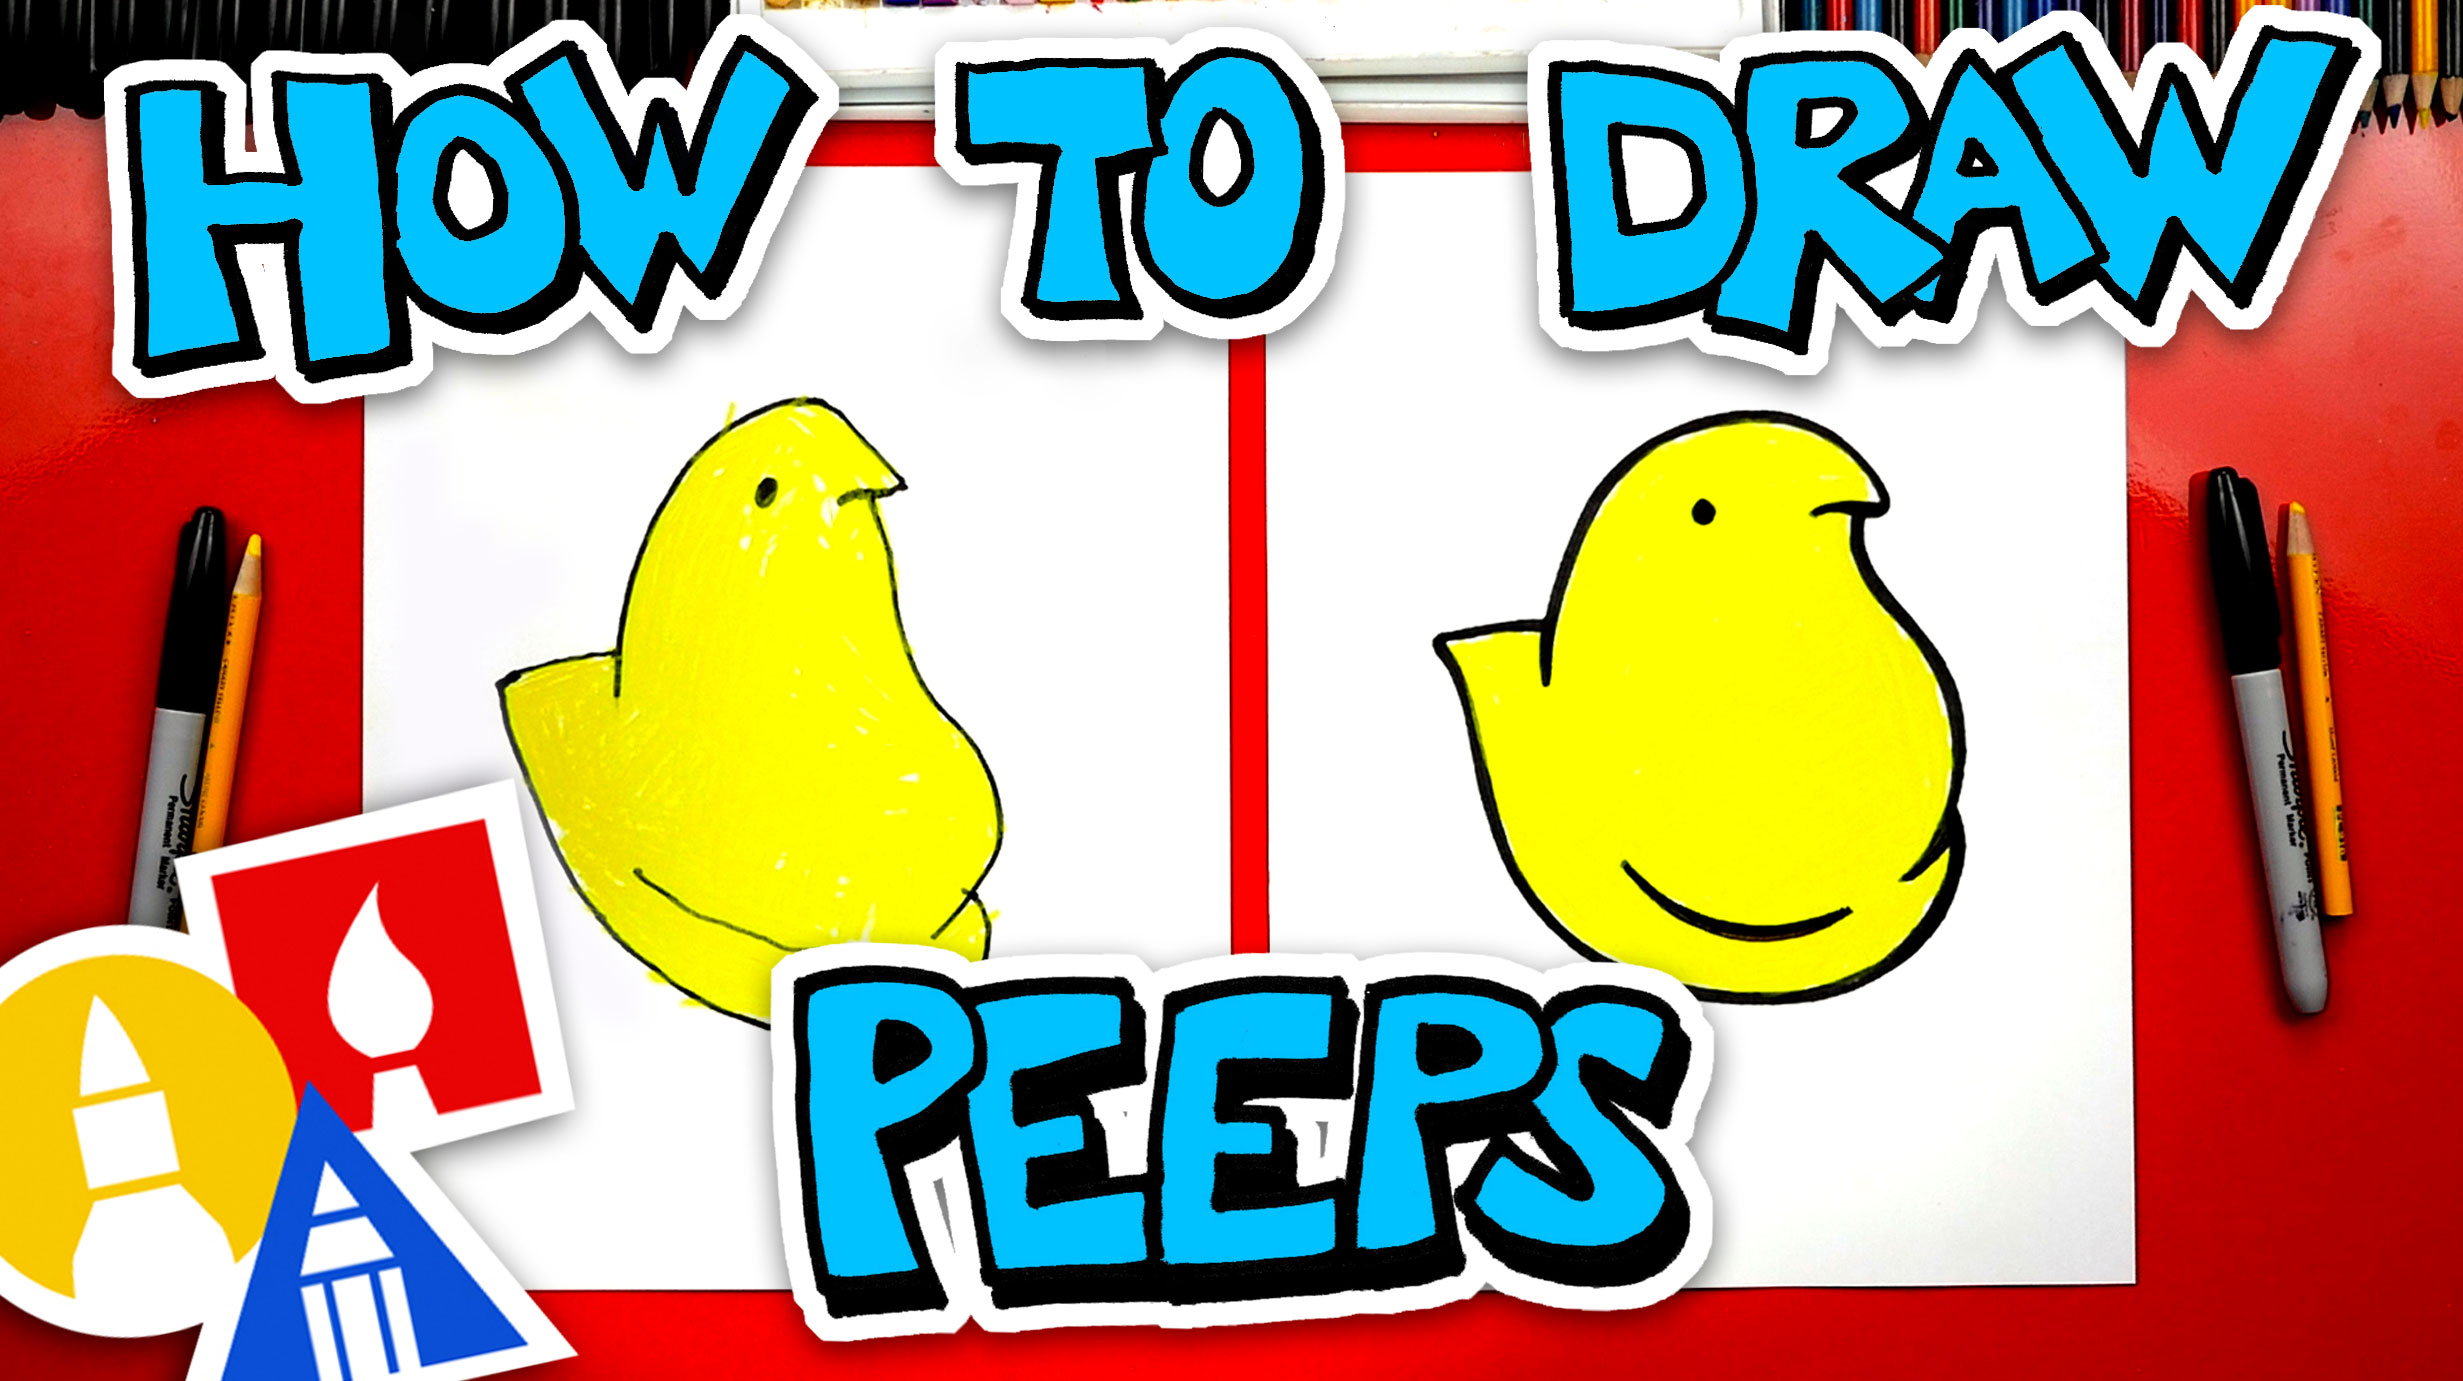 How To Draw An Easter Peeps Chick - Art For Kids Hub